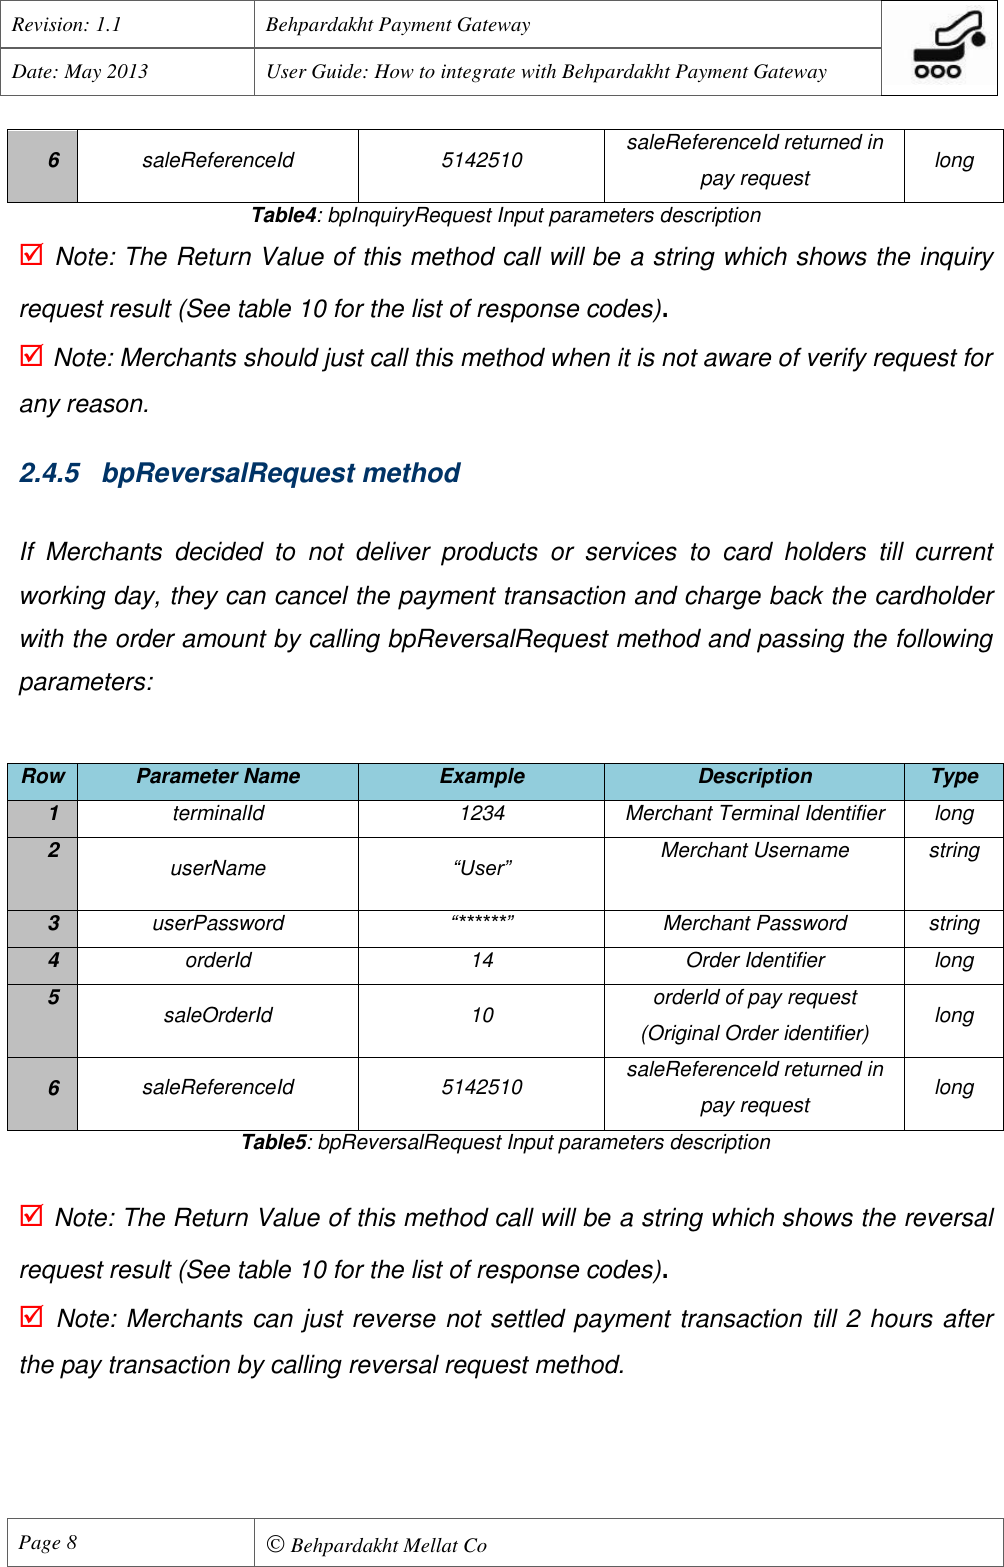 Page 9 of 11 - Behpardakht Mellat - Payment Gateway PGW User Manual English Ver 1.1